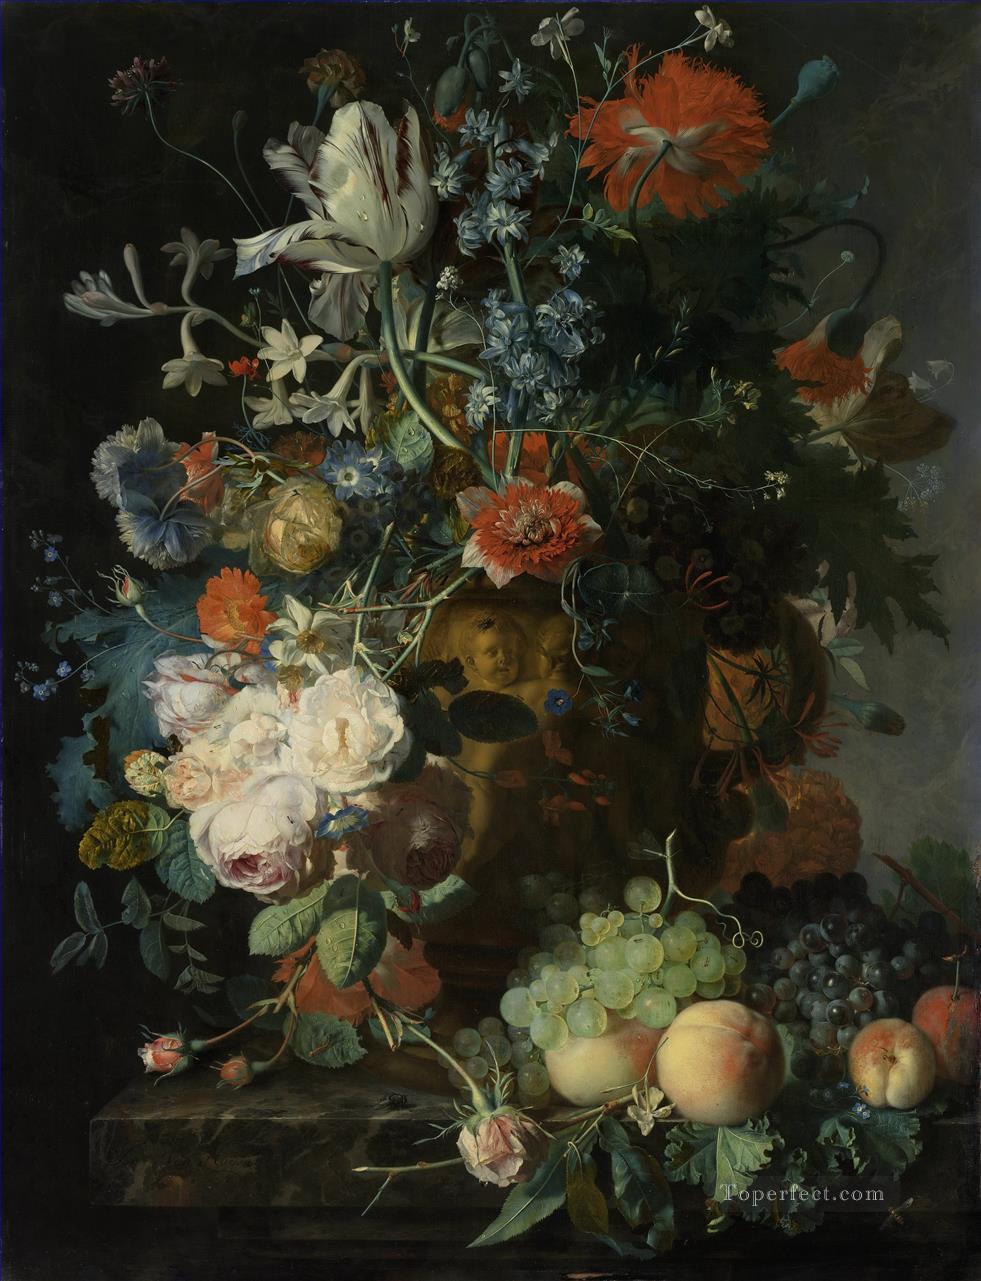 Still Life with Flowers and Fruit 4 Jan van Huysum classical flowers Oil Paintings